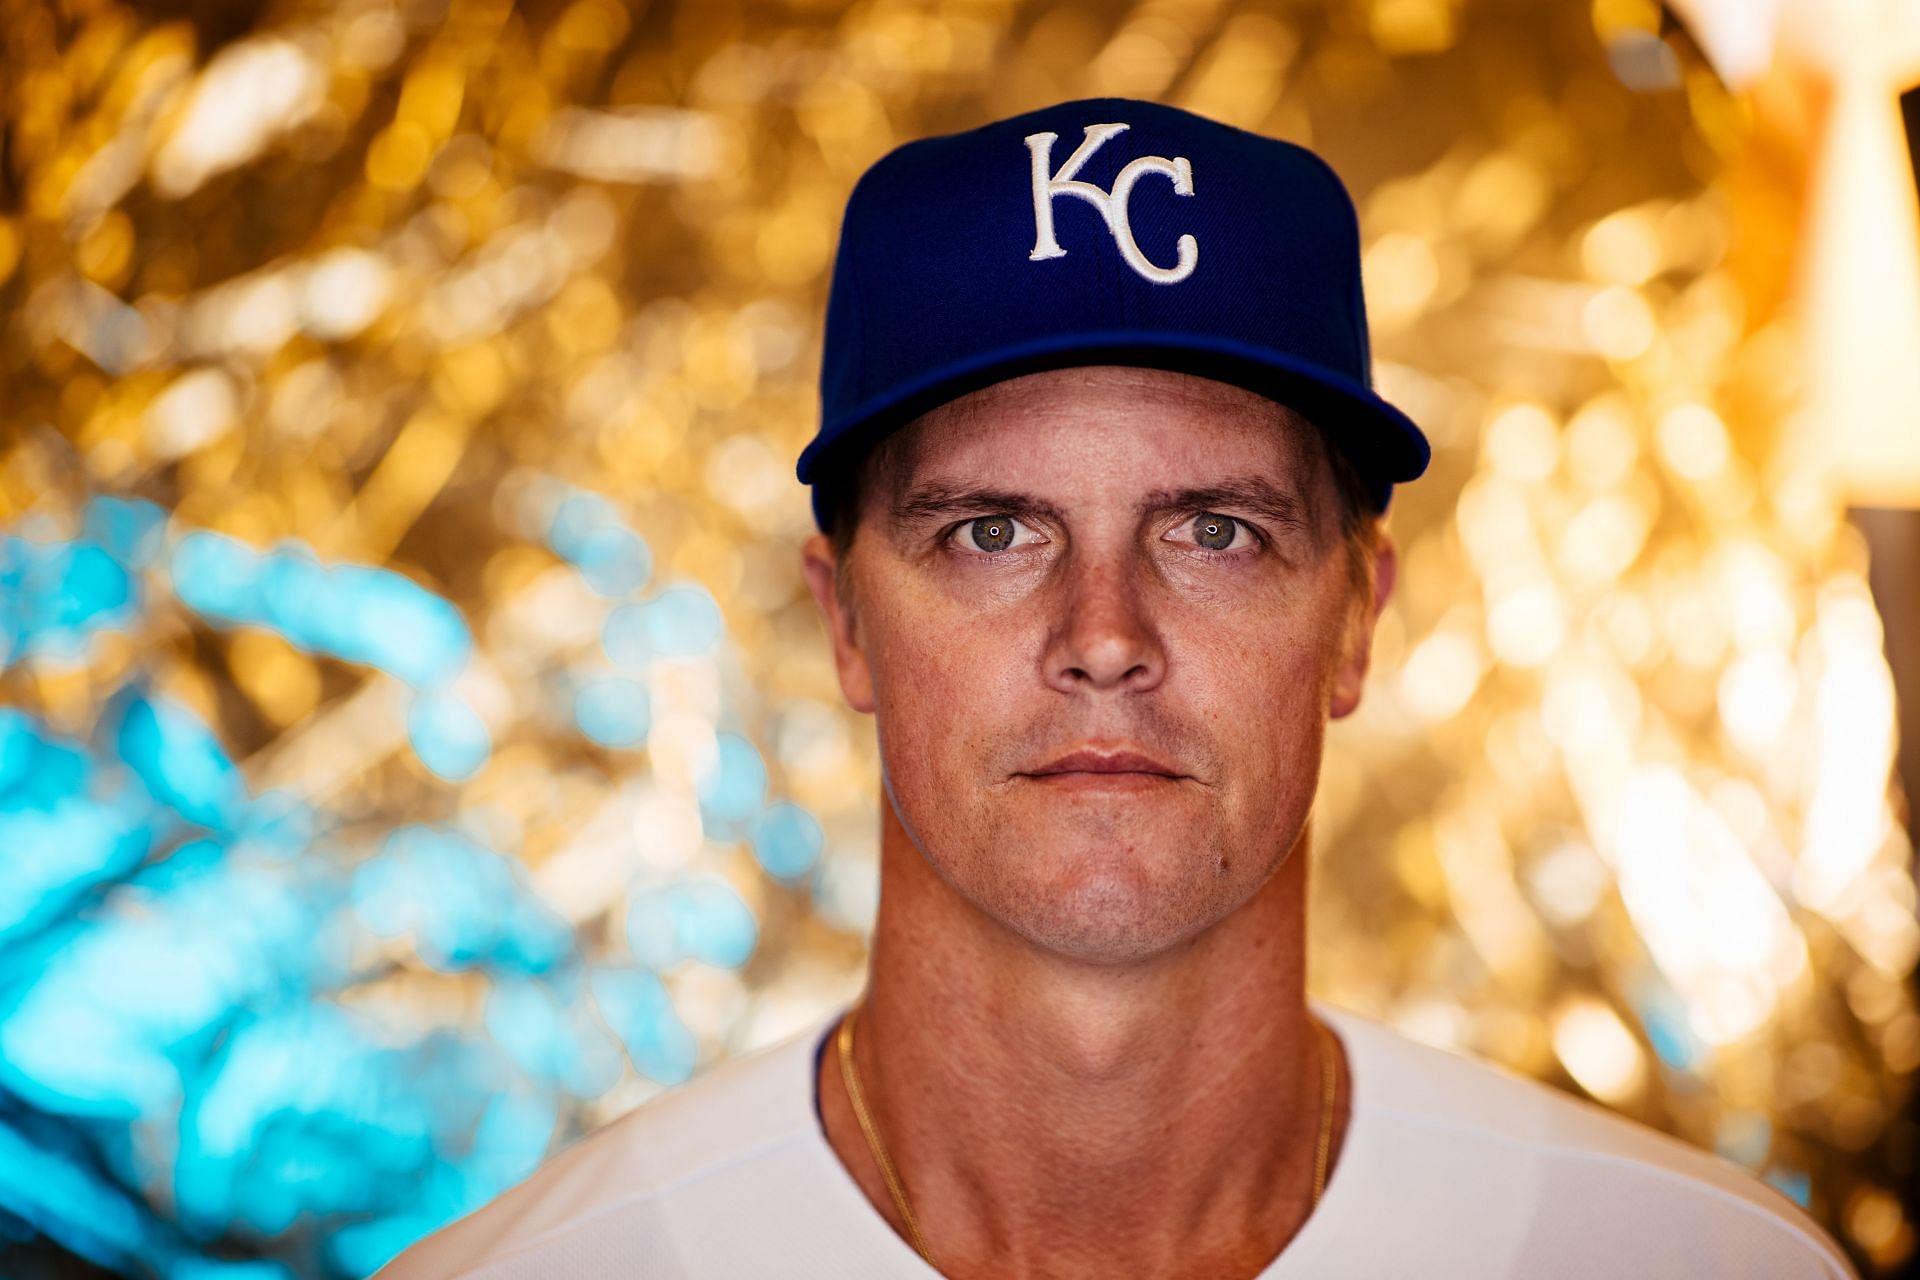 Veteran MLB pitcher Zack Greinke was once upset with his teammates